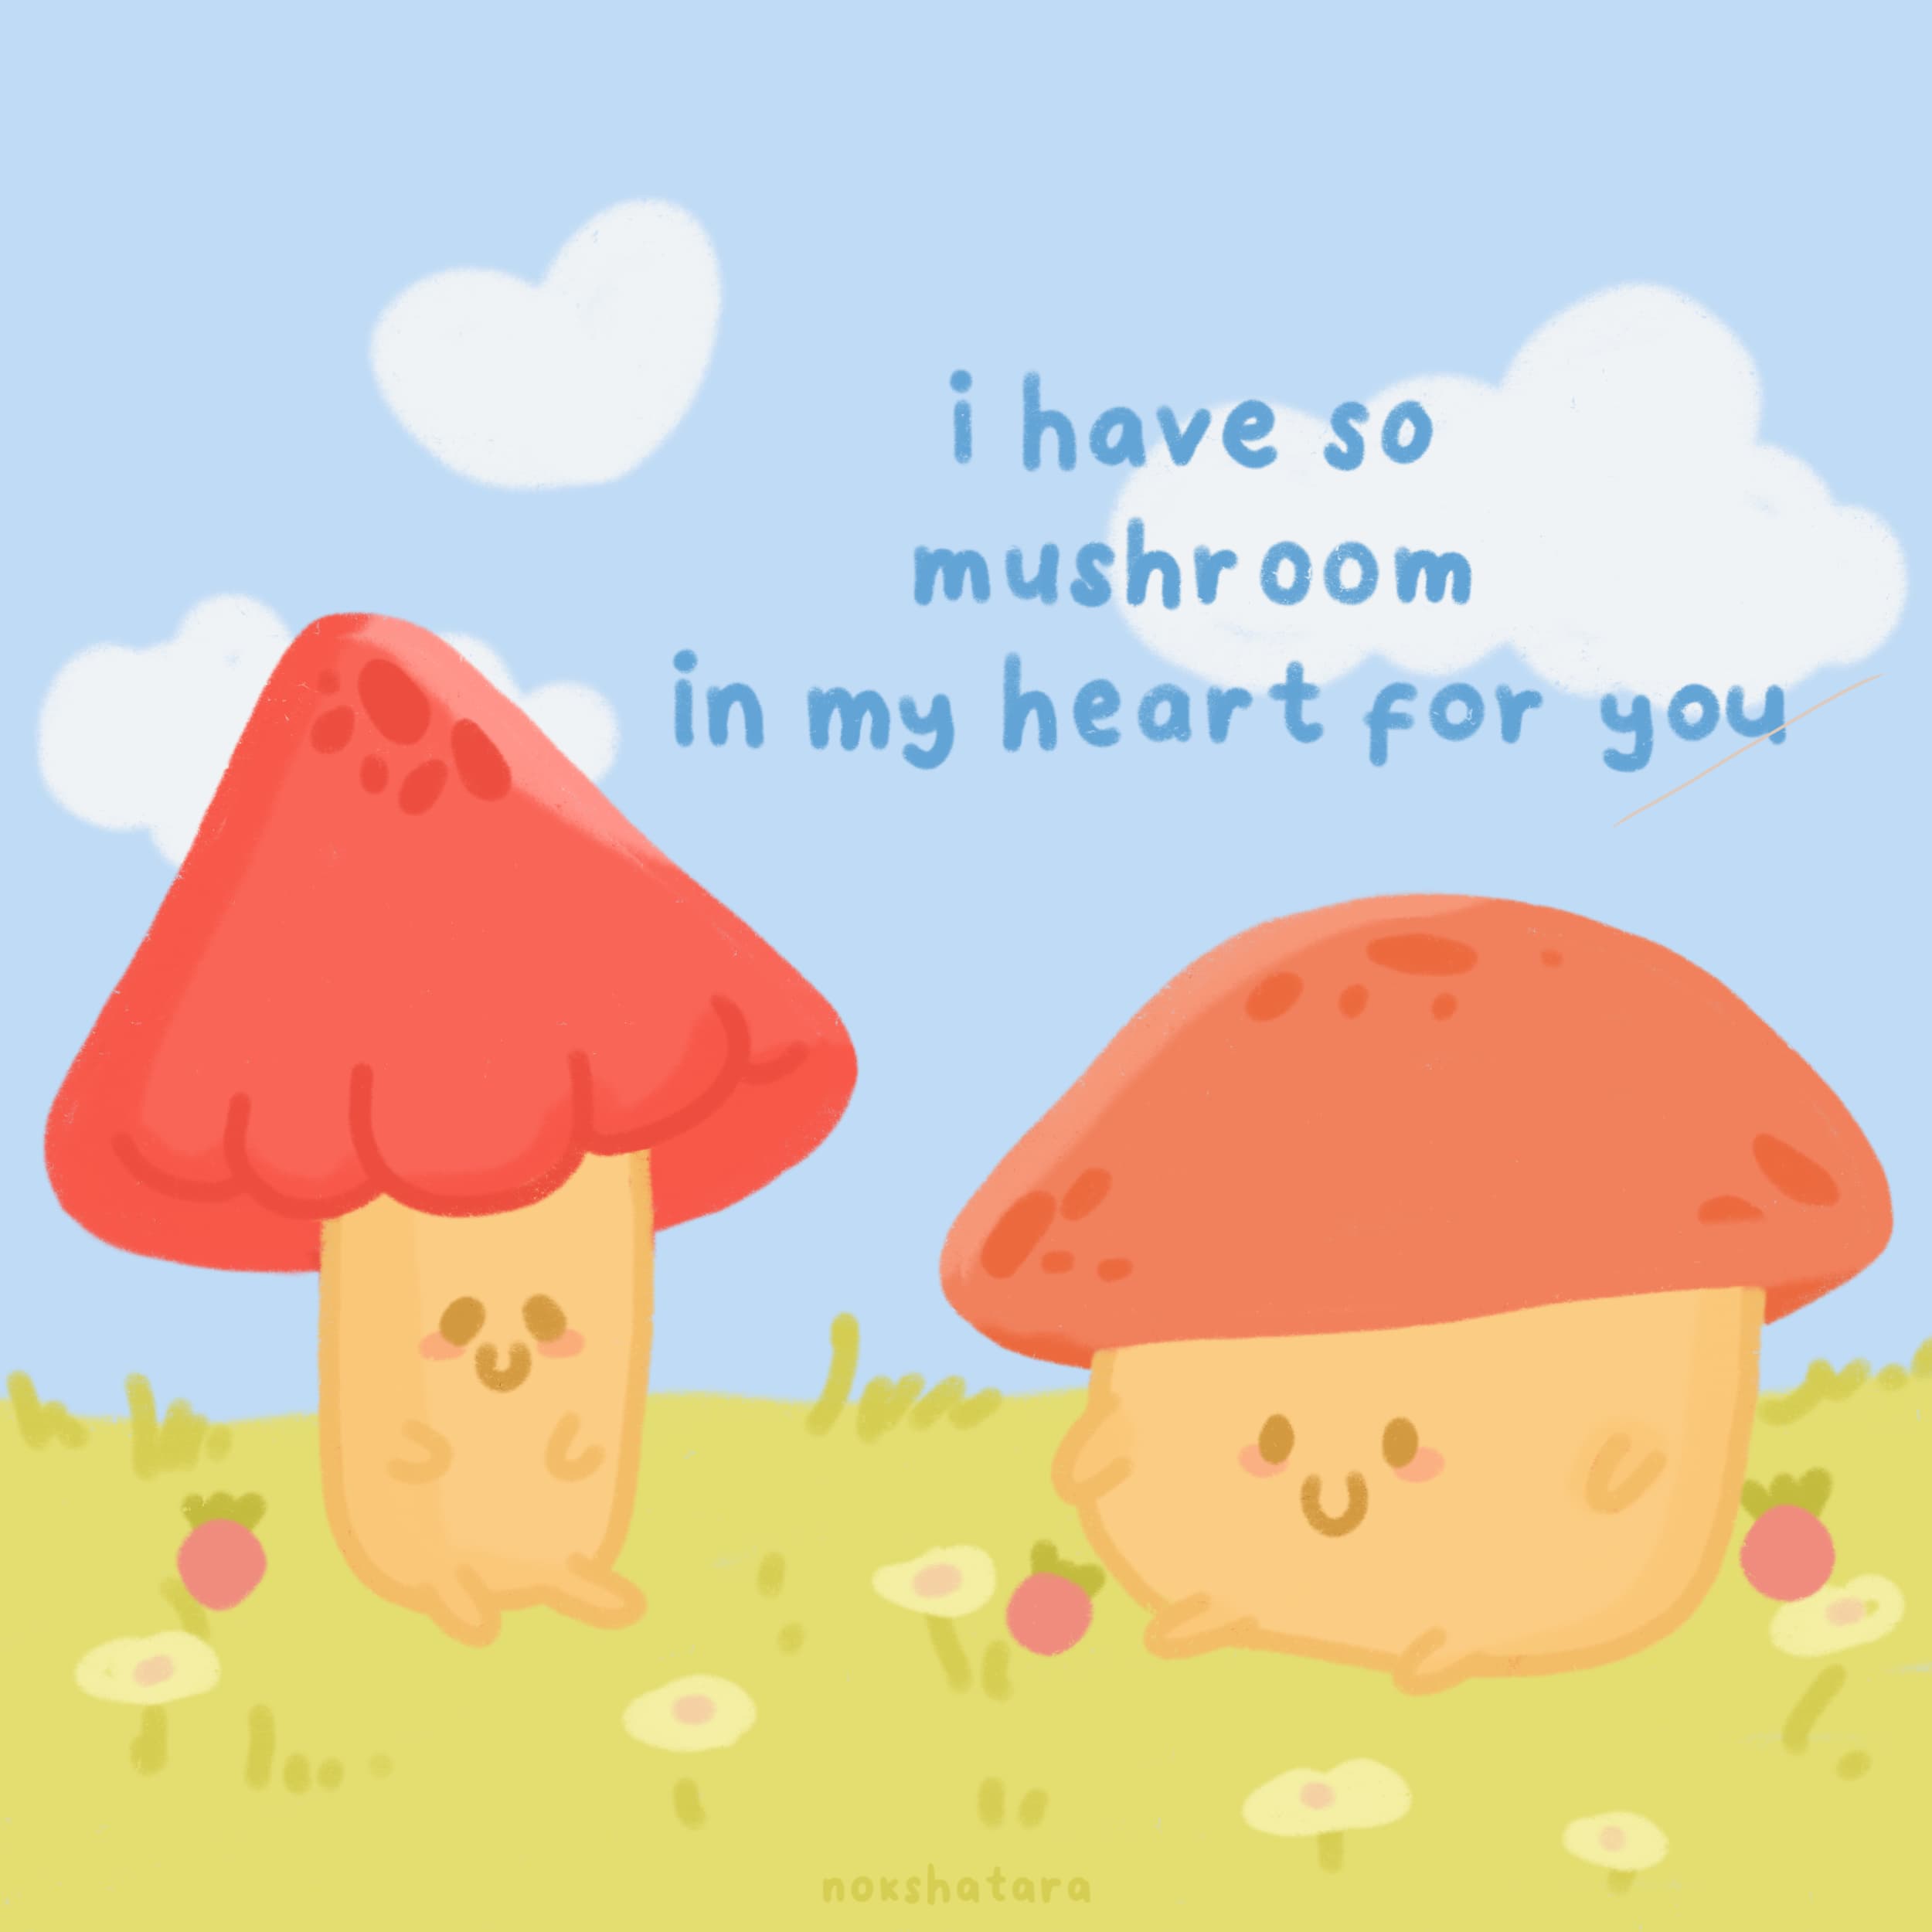 Illustration of two different shaped mushrooms saying I have so mushroom (much room) in my heart for you